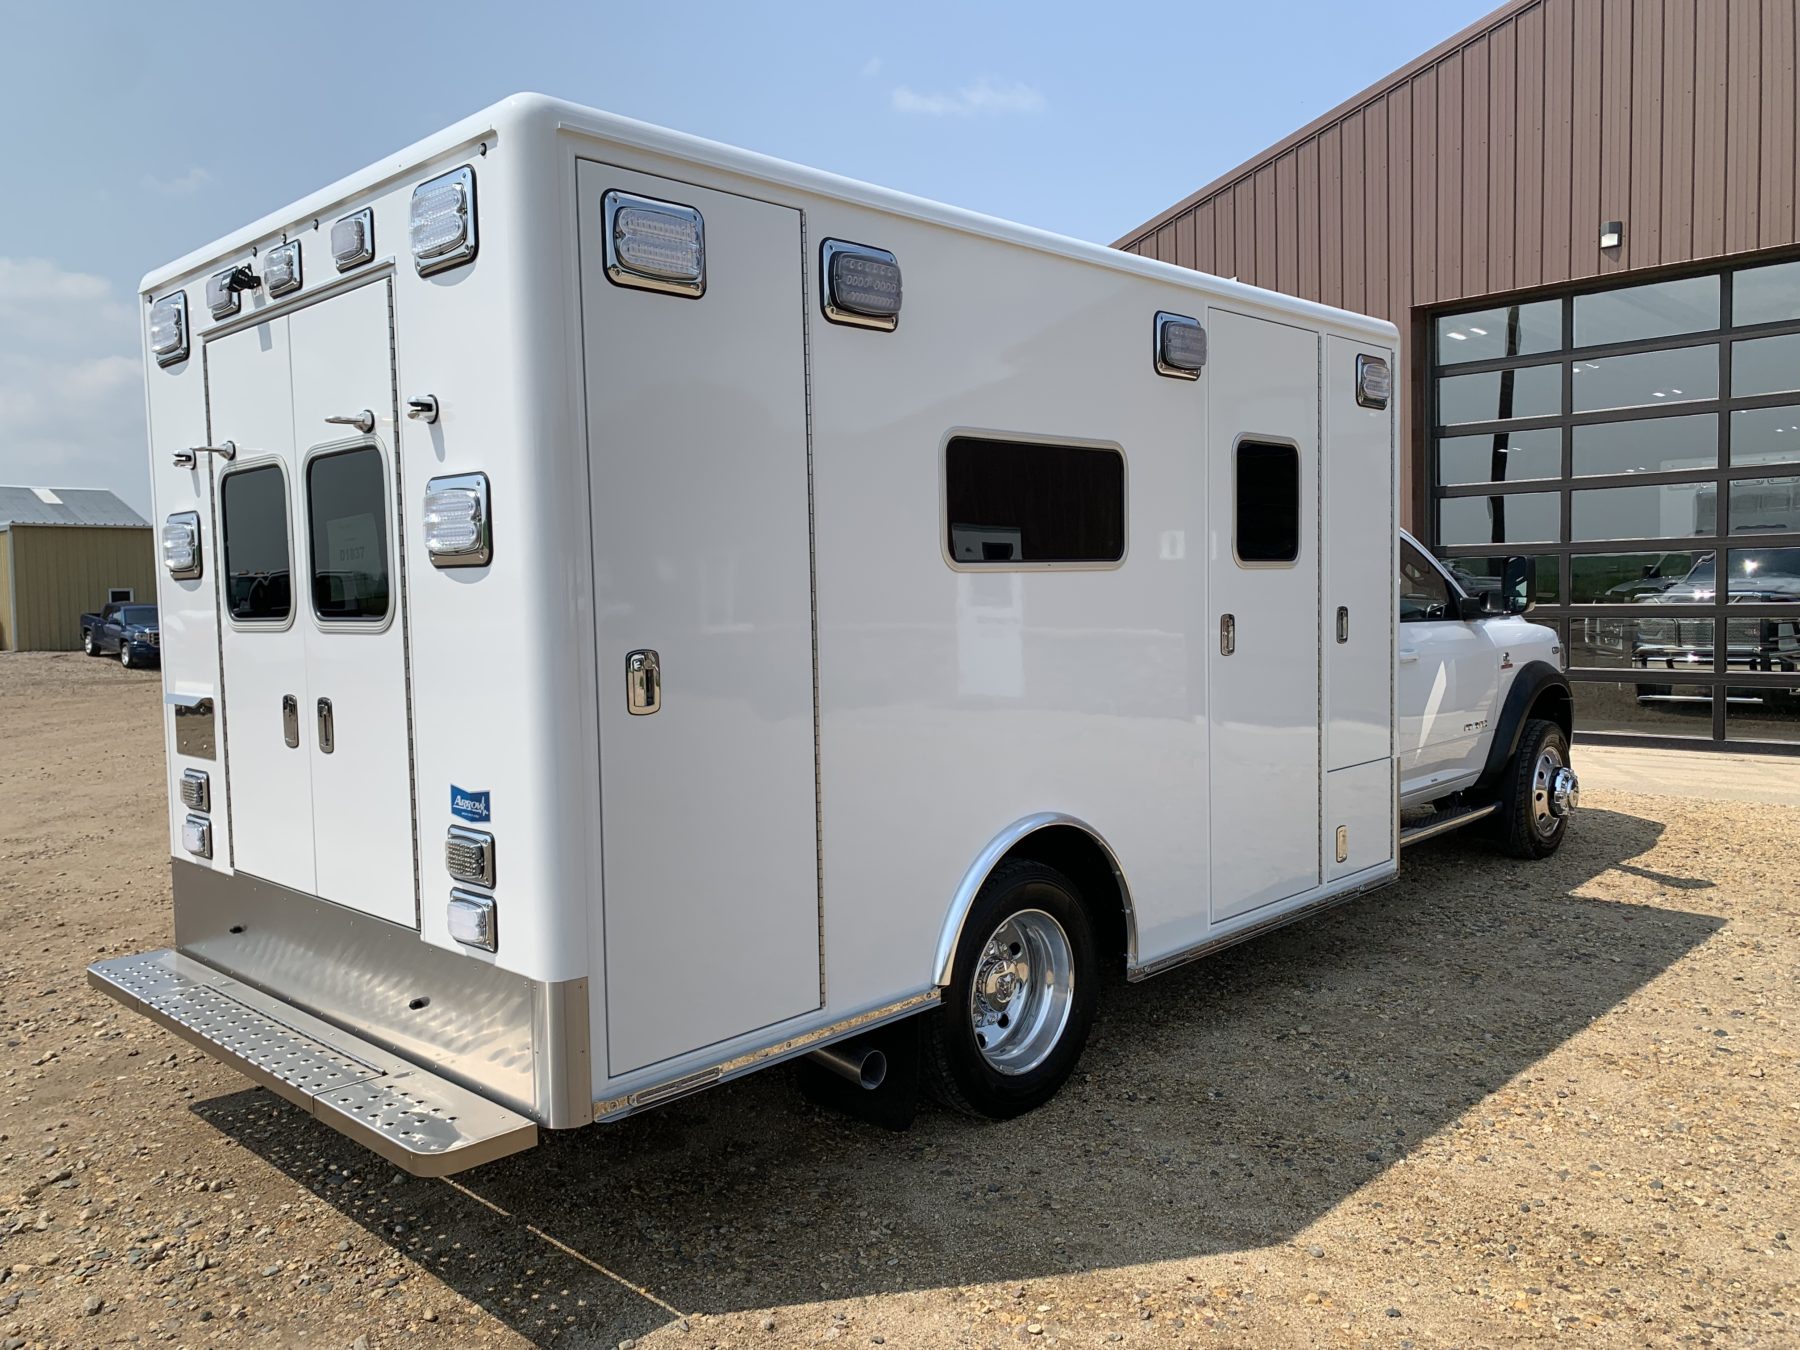 2021 Ram 4500 4x4 Heavy Duty Ambulance For Sale – Picture 12